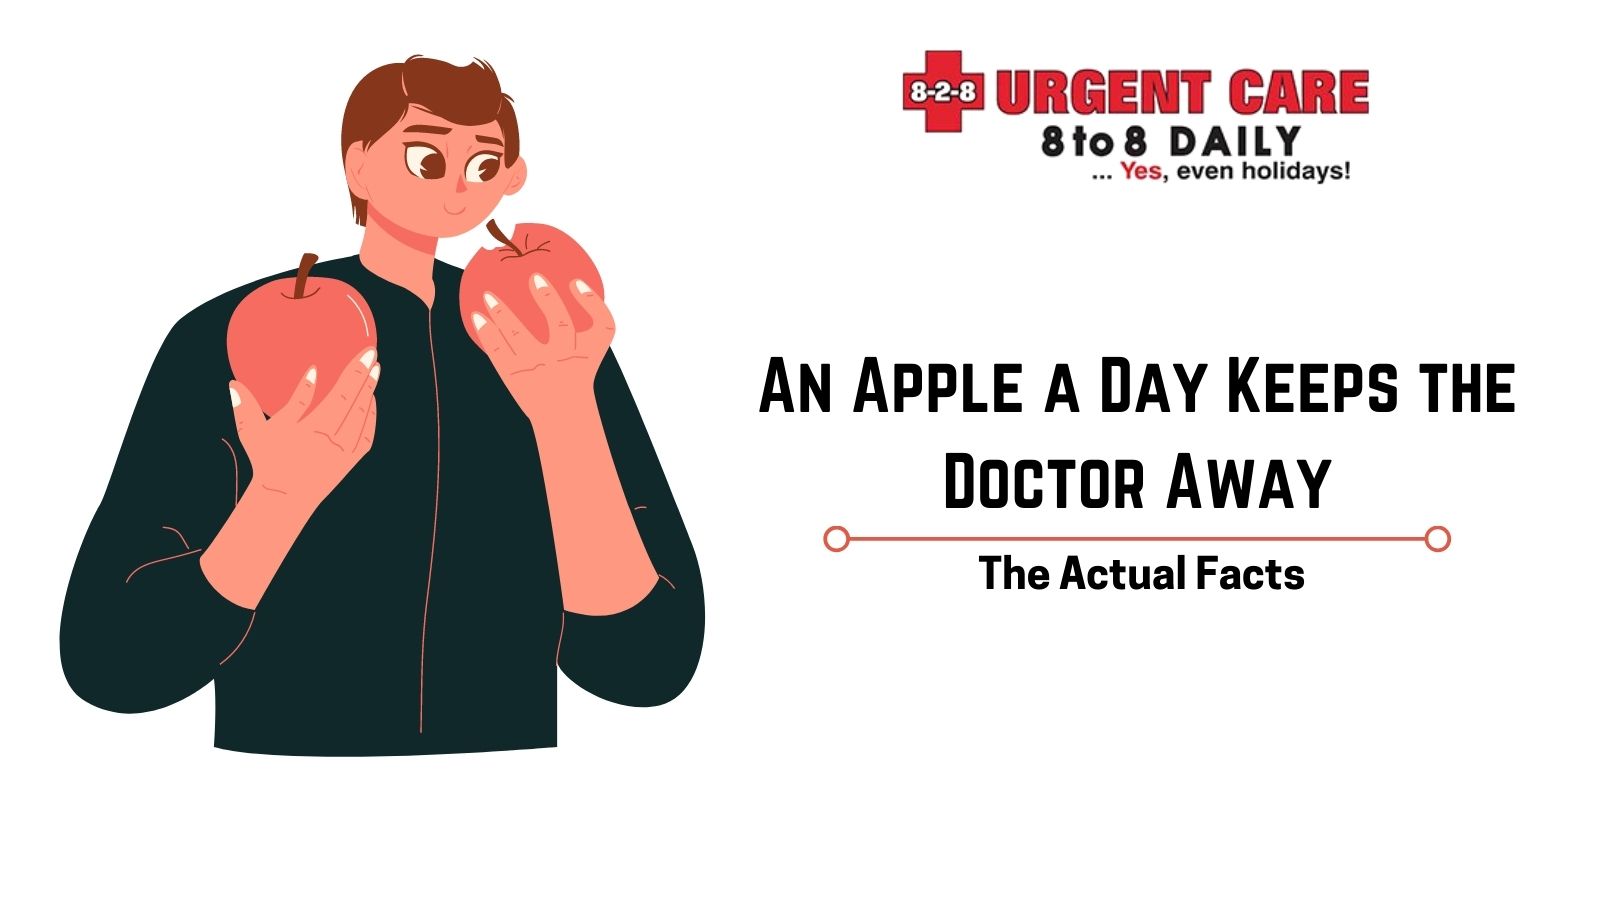 An Apple a Day Keeps the Doctor Away – The Actual Facts